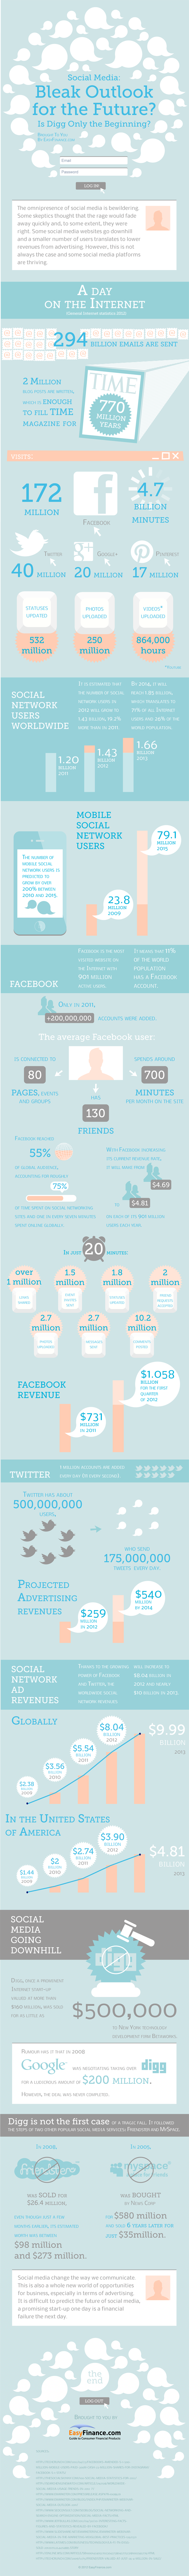 Social Media: Bleak Outlook for the Future? Is Digg Only the Beginning? (Infographic) 